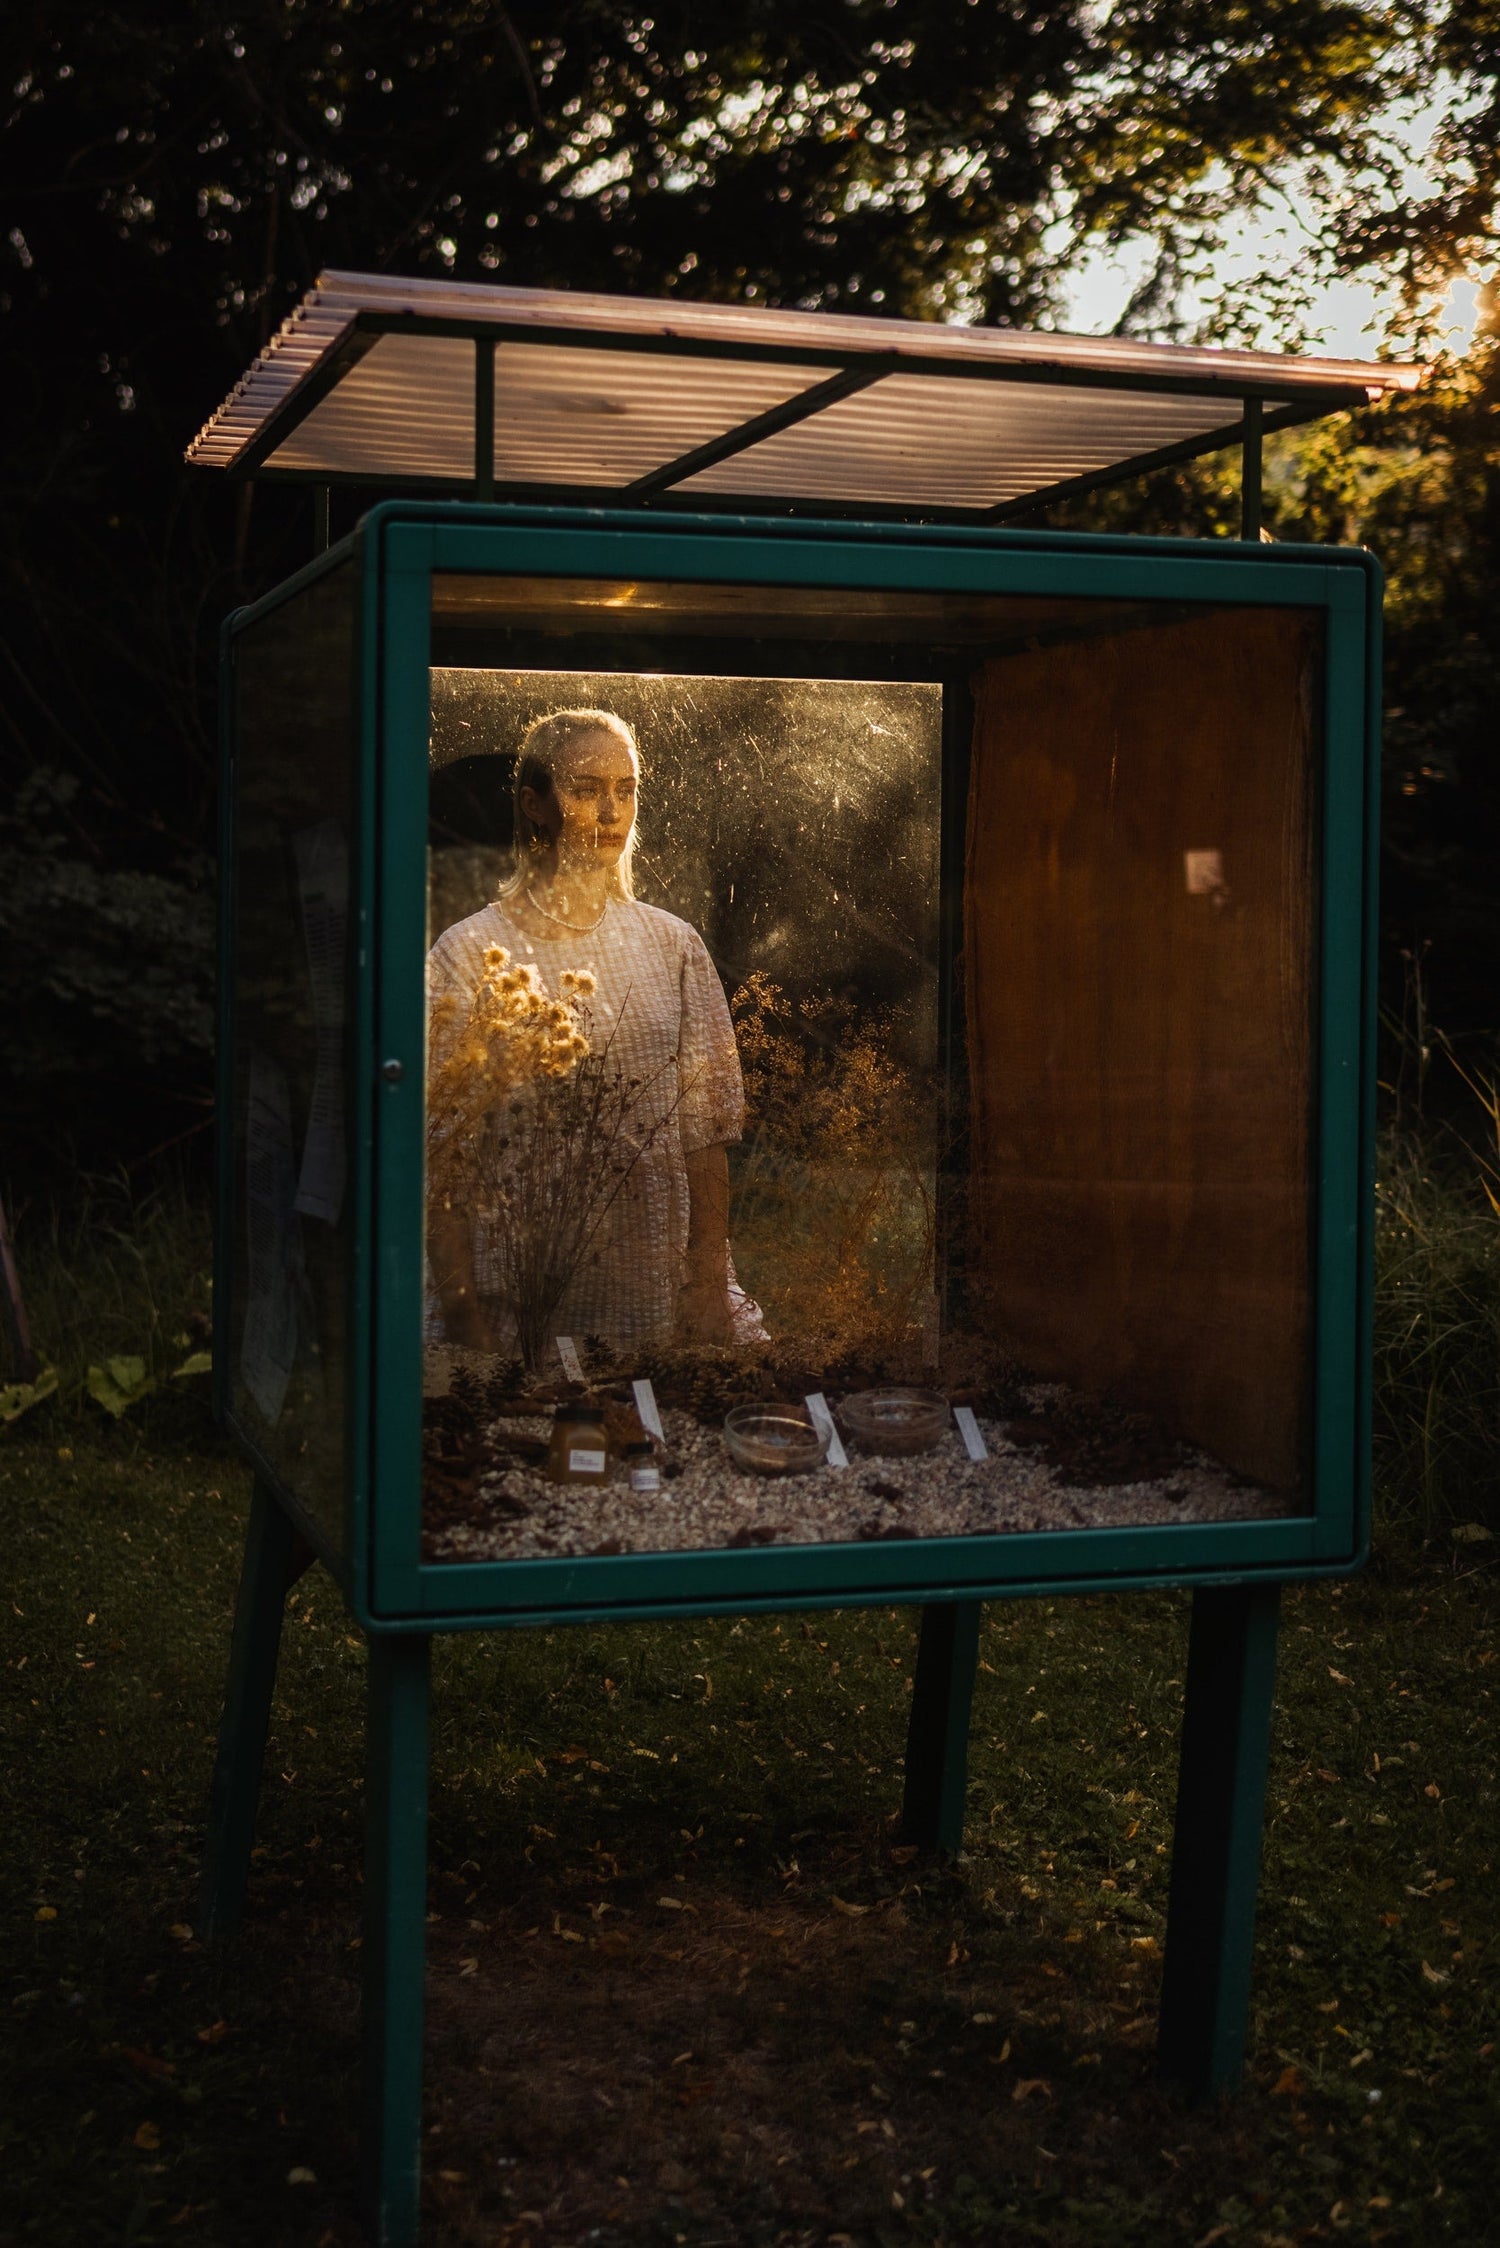 A figure stands behind a glass pane, bathed in the golden hues of sunlight, creating a visual metaphor of introspection and confinement in Celin May's Sun Collection.